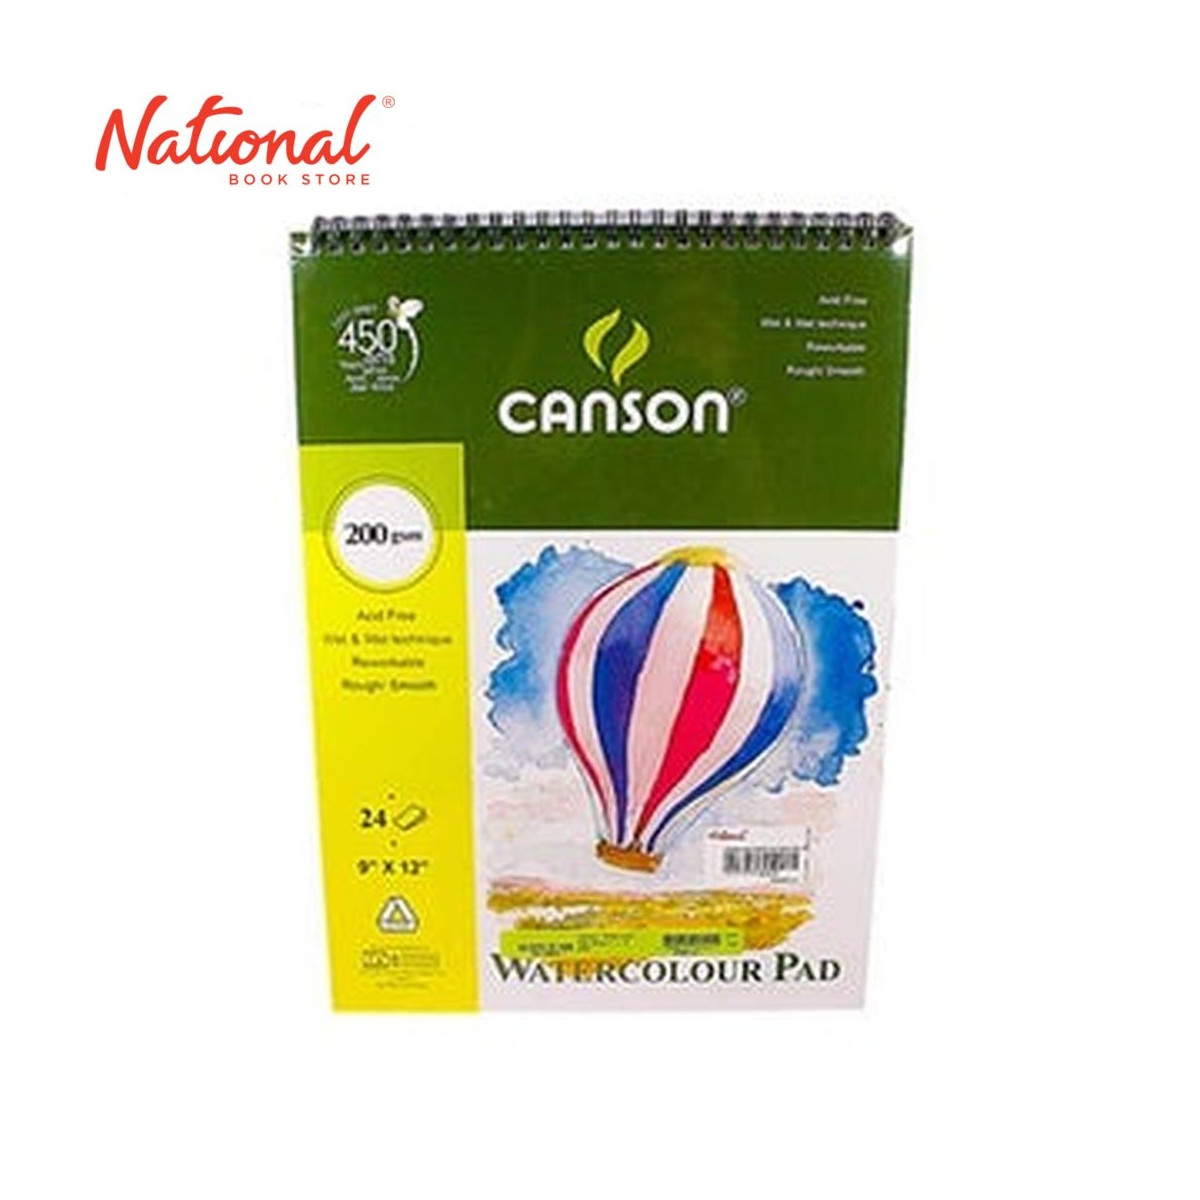 CANSON WATERCOLOR PAD 9X12 24 SHEETS